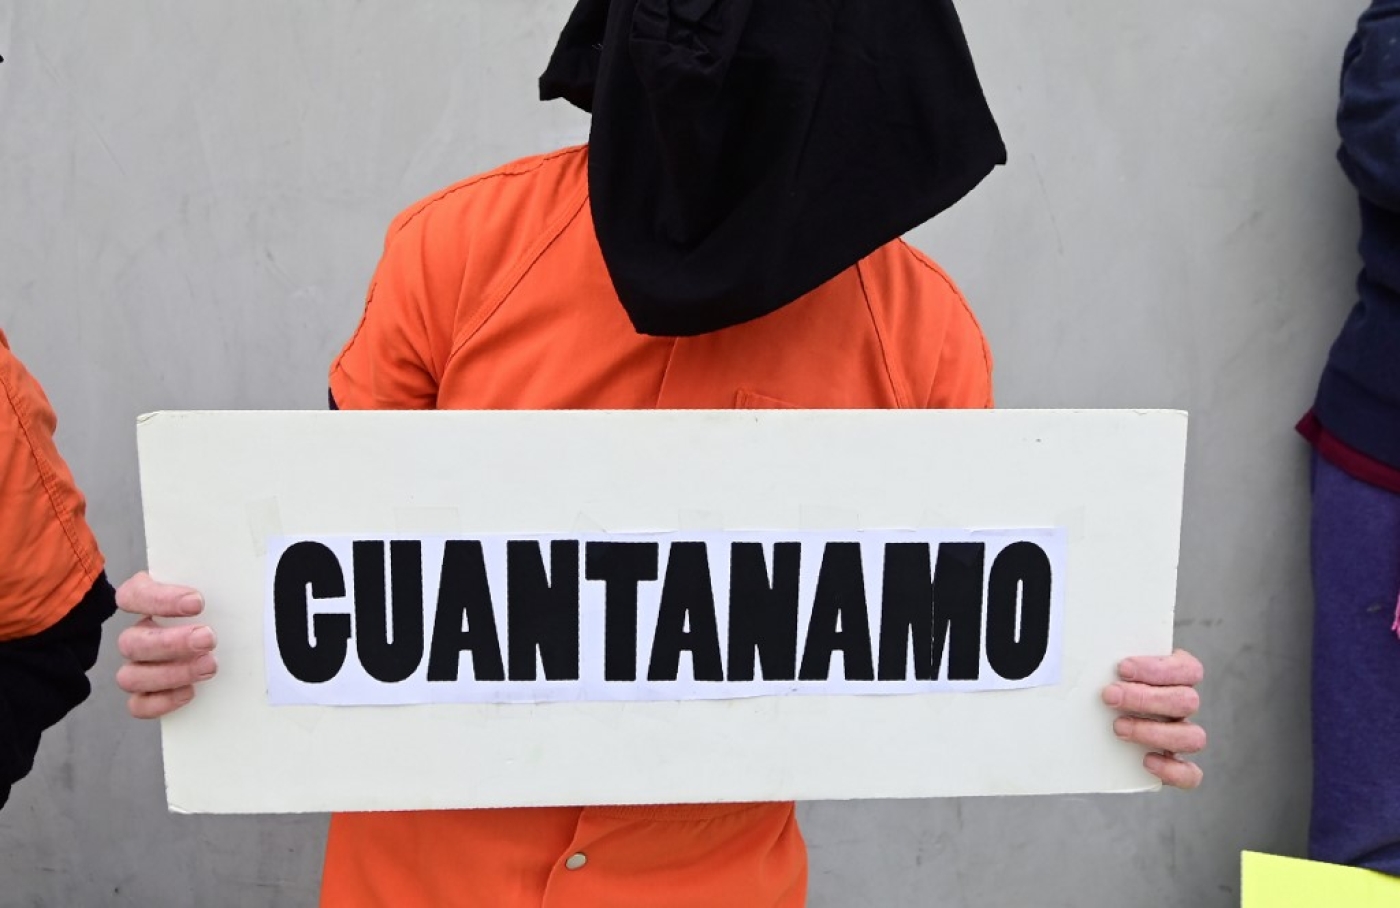 The prison at Guantanamo Bay opened in 2002 